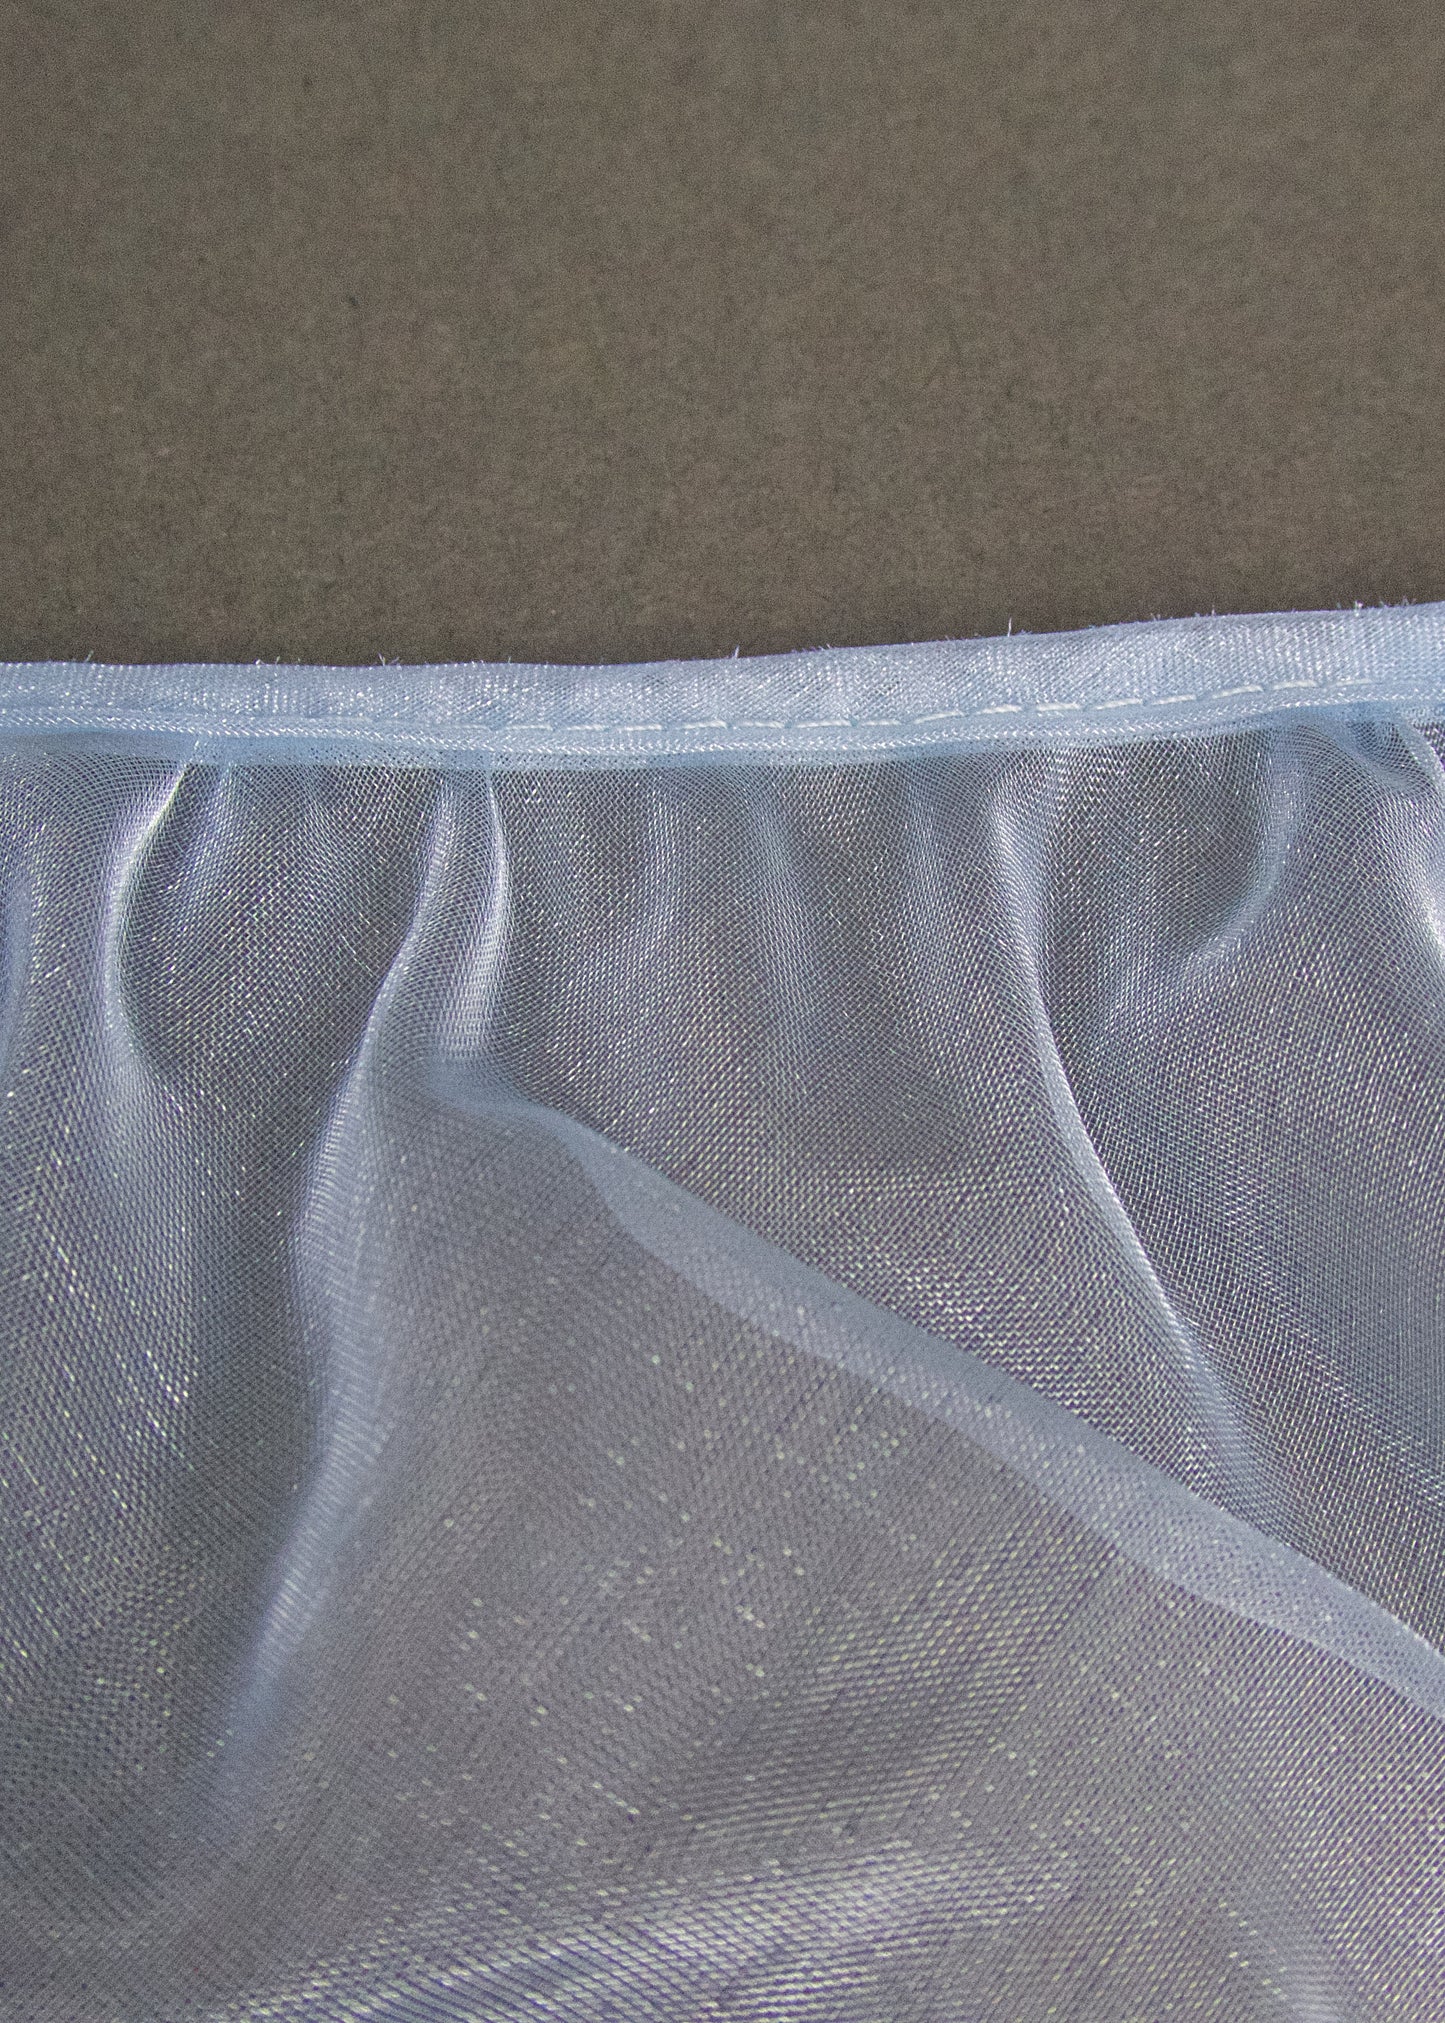 4 Inch Baby Blue Sparkle Organza Trim, Sold by the yard